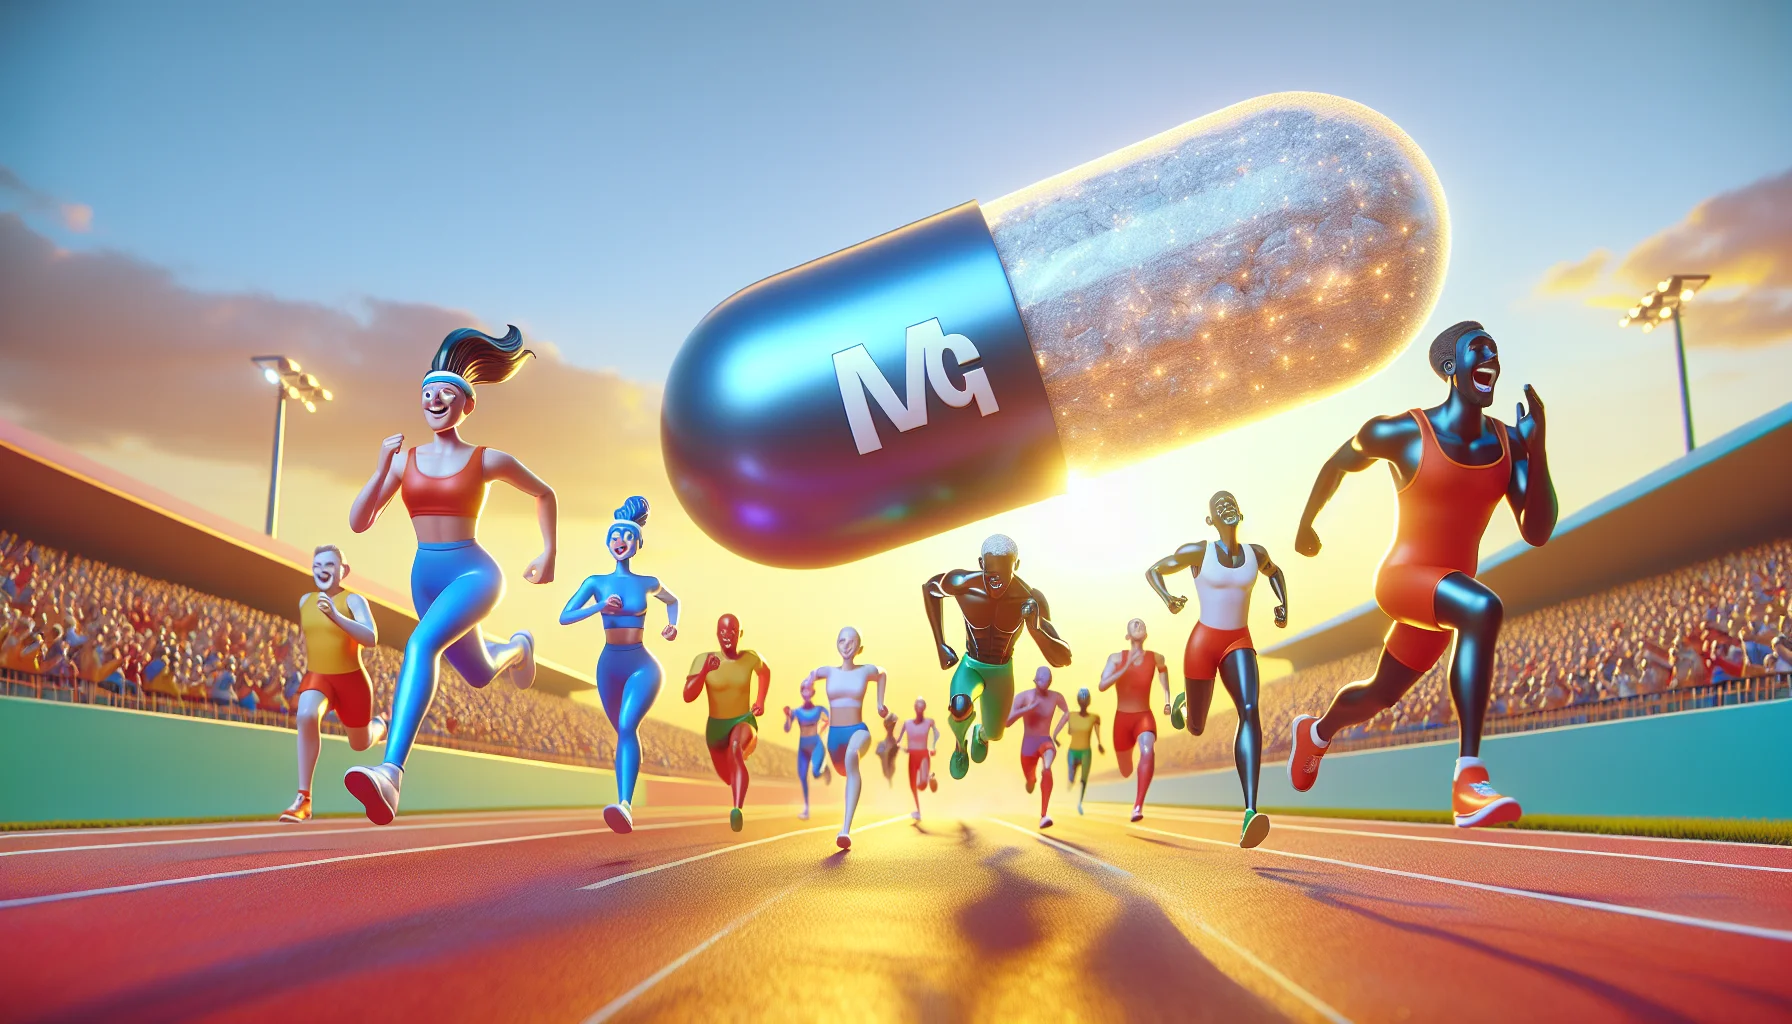 Create a comedic and visually appealing image showcasing the effectiveness of magnesium supplements for sports performance, leg cramps, and sleep. Imagine a playful scenario where cartoon-like athletic figures of varying descent and gender are running a race. Their legs are glowing brightly, symbolizing the alleviation of leg cramps, and they are wide awake, indicating the magnesium's effects on improving sleep. Nearby floats a giant, 3D, shining magnesium capsule, casting a soft light on everything. The setting can be a colorful race track, during golden hour.